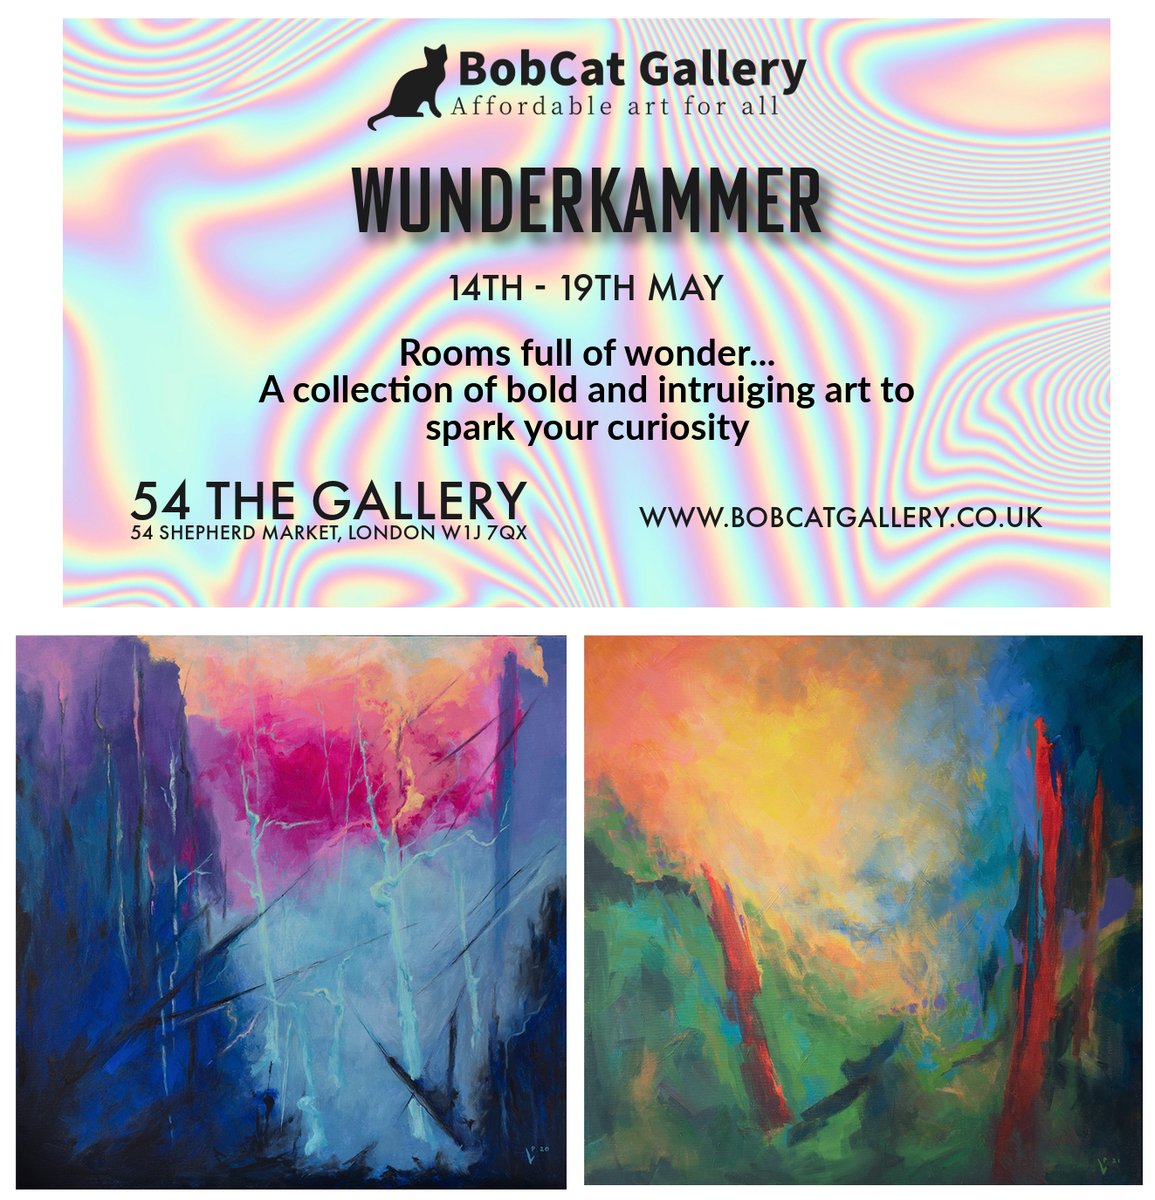 'Wunderkammer' with @bobcat_gallery opens soon in Mayfair, & my paintings 'Canyon' &'Soaring' are in the show.
Full etails n my link in profile.

#bobcatgallery #artcanorg #londonartist #contemporaryart #affordableart #landscape#exhibition#whatson #londonexhibition